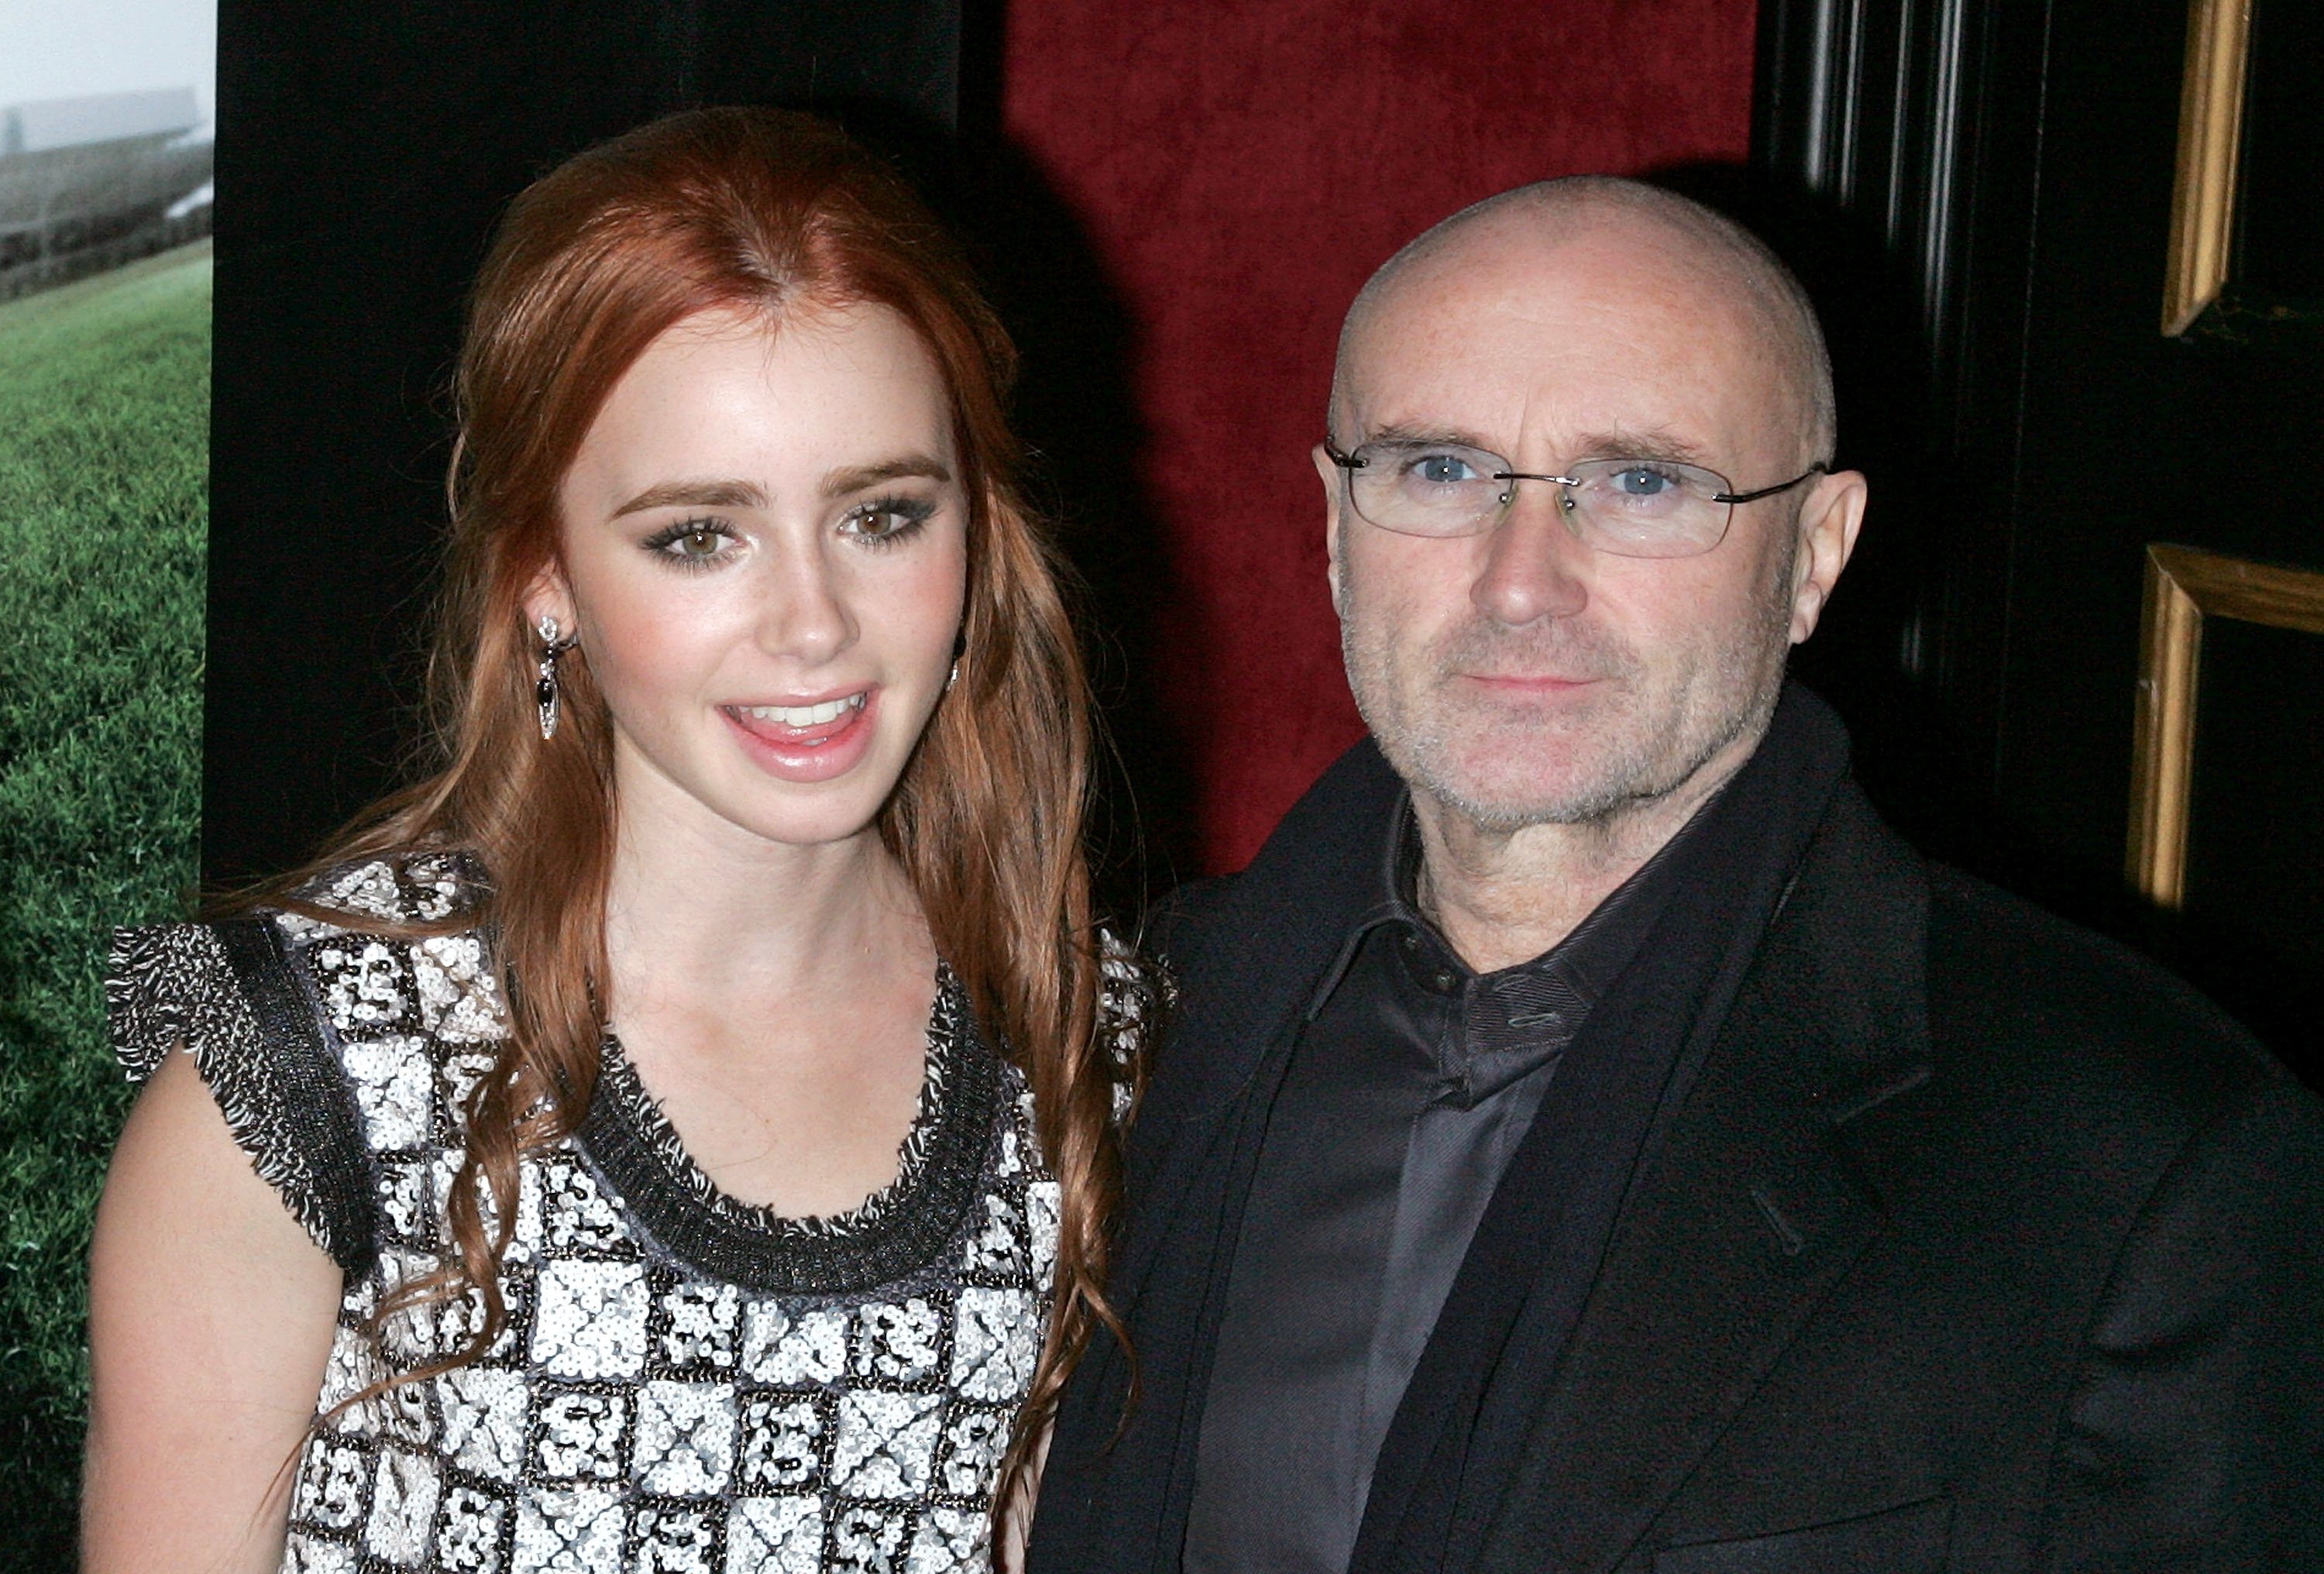 Actor Lily Collins, left, with her father musician Phil Collins at the 2009 premiere of the film 'The Blind Side'